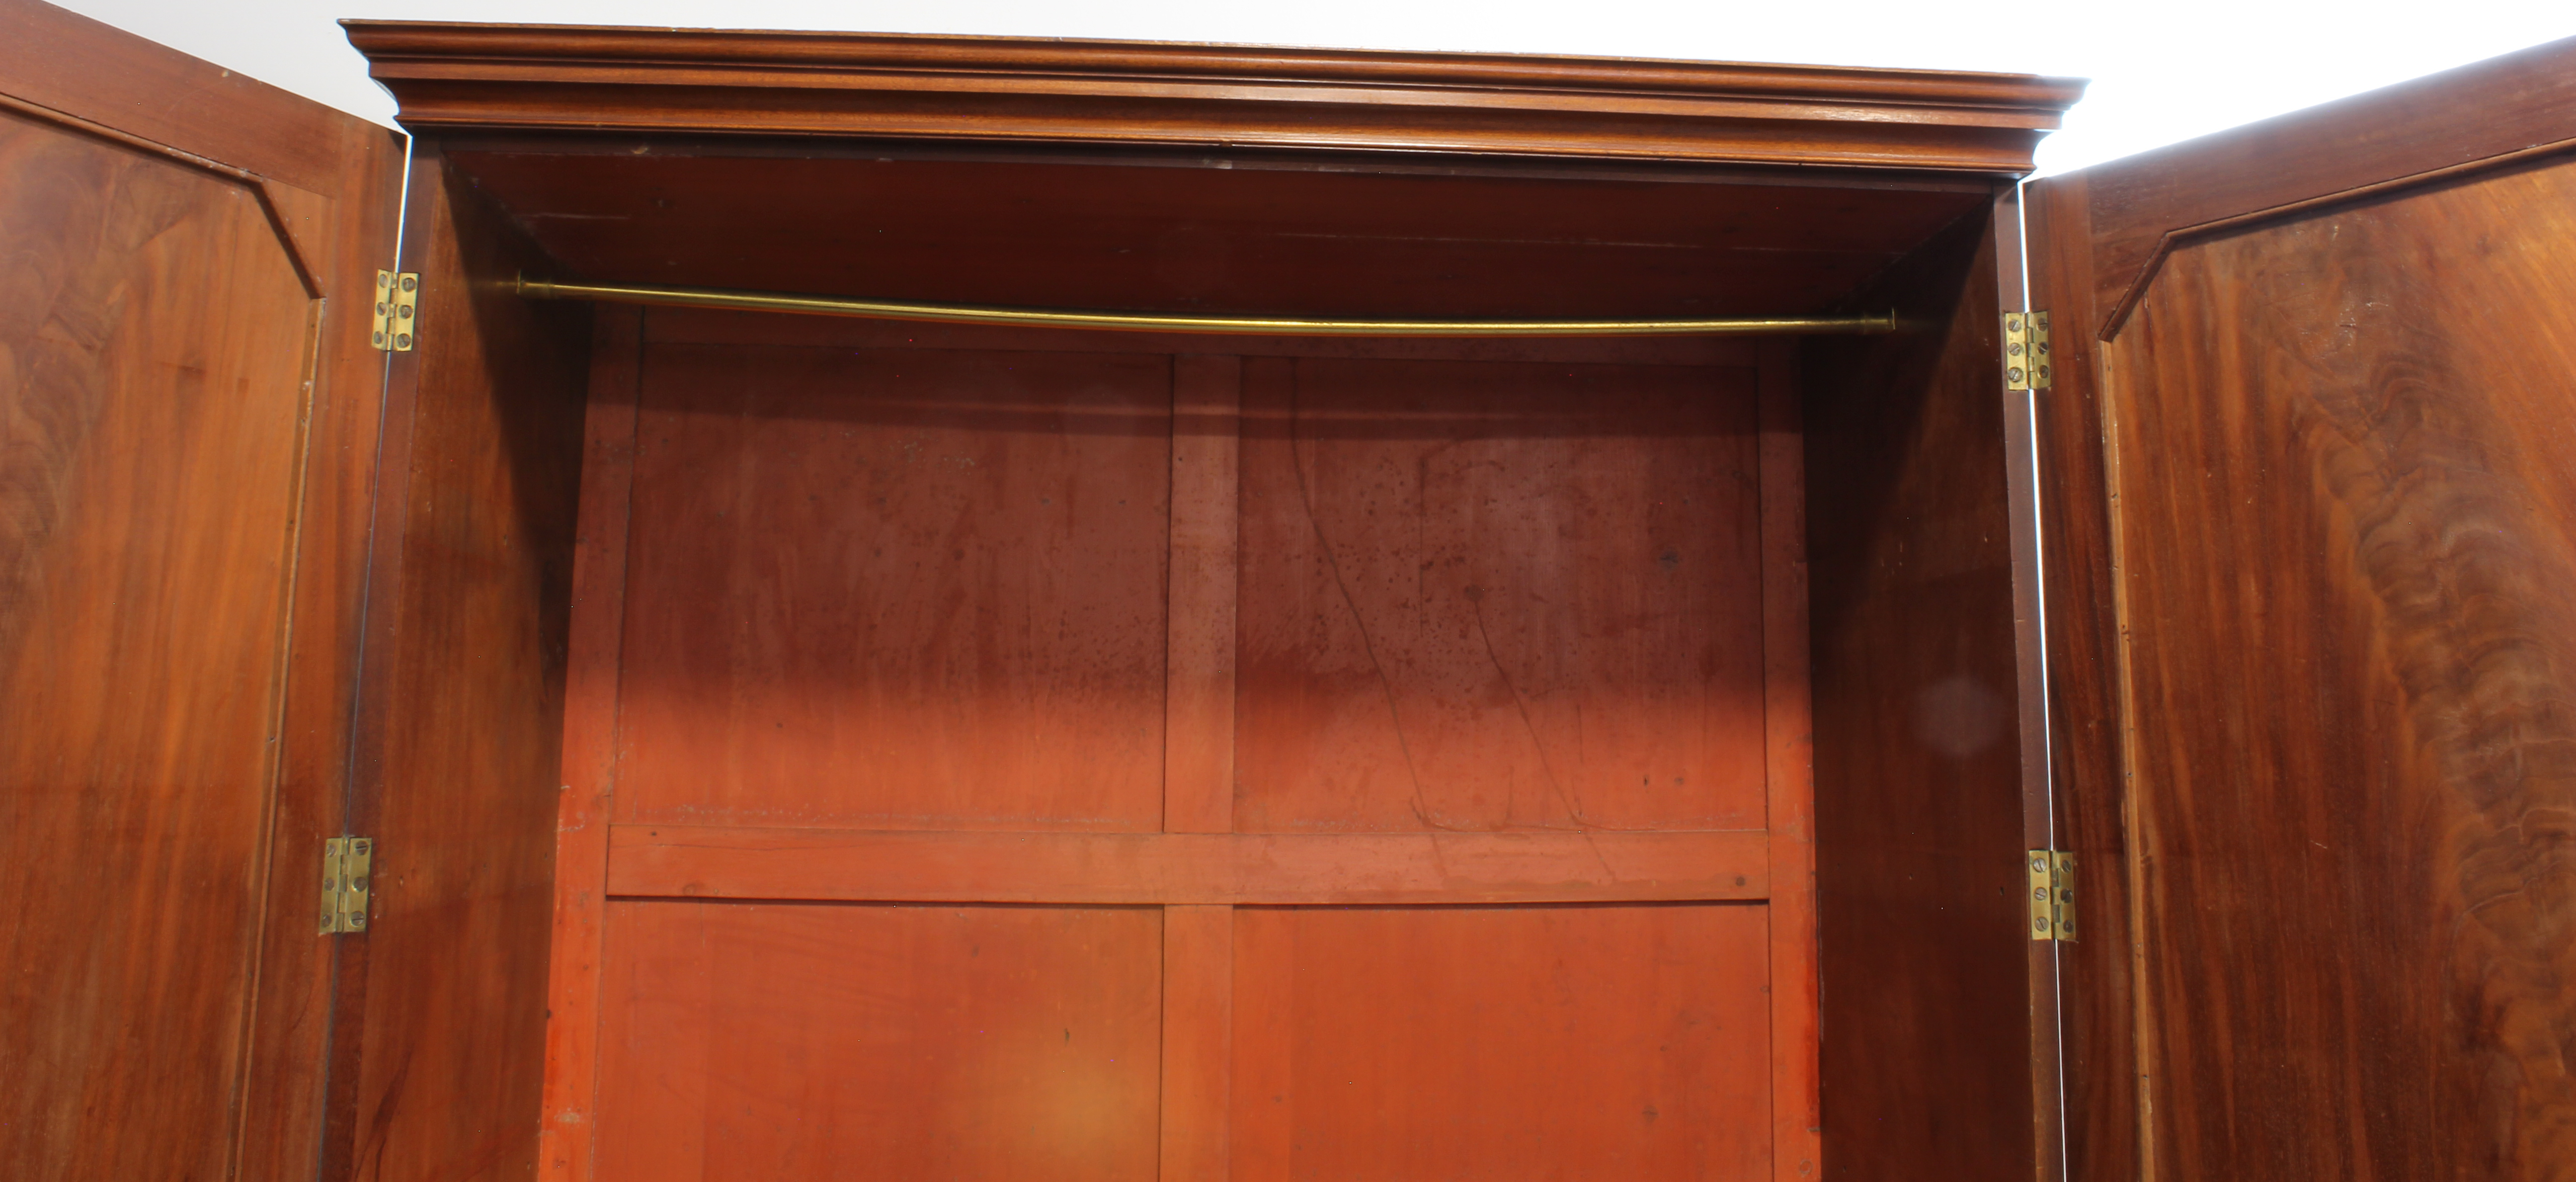 A late 18th century mahogany linen press: short outset cornice above two figured panel doors - Image 2 of 3